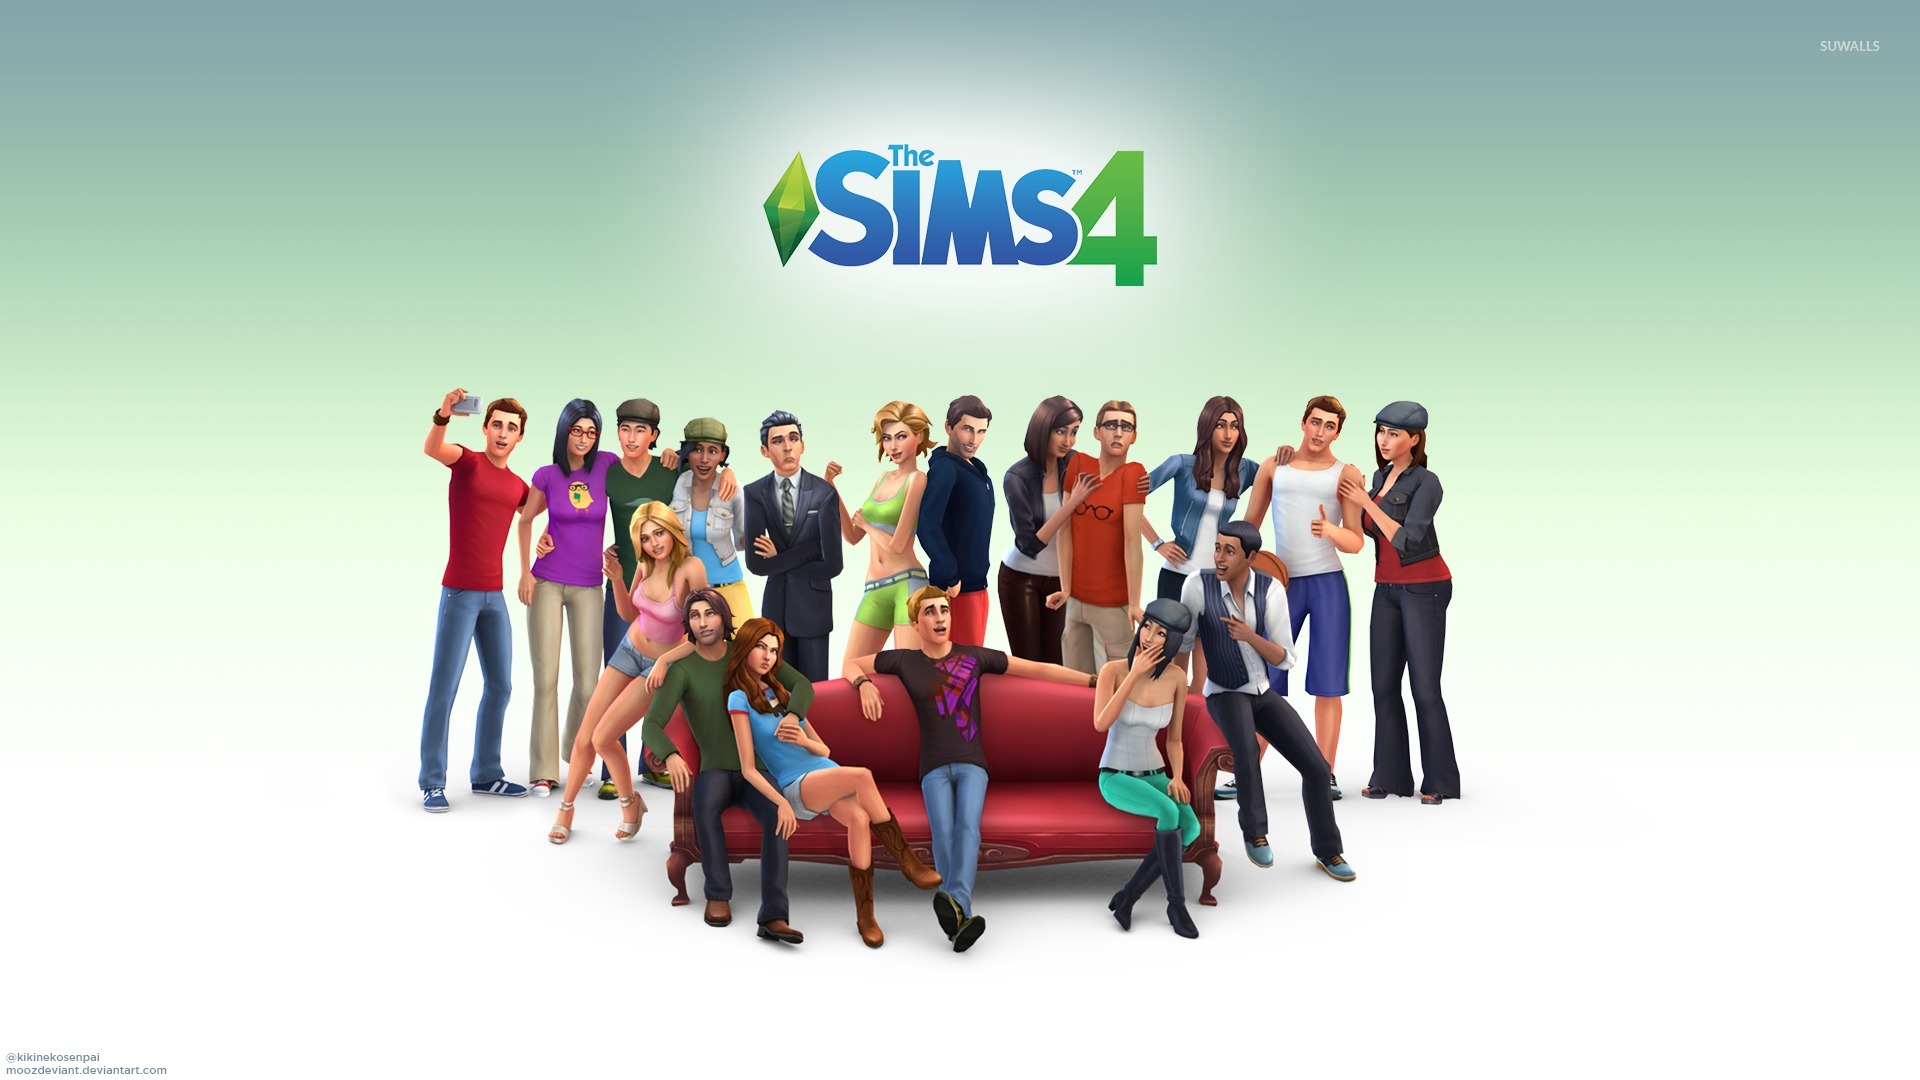 The Sims Wallpaper Game